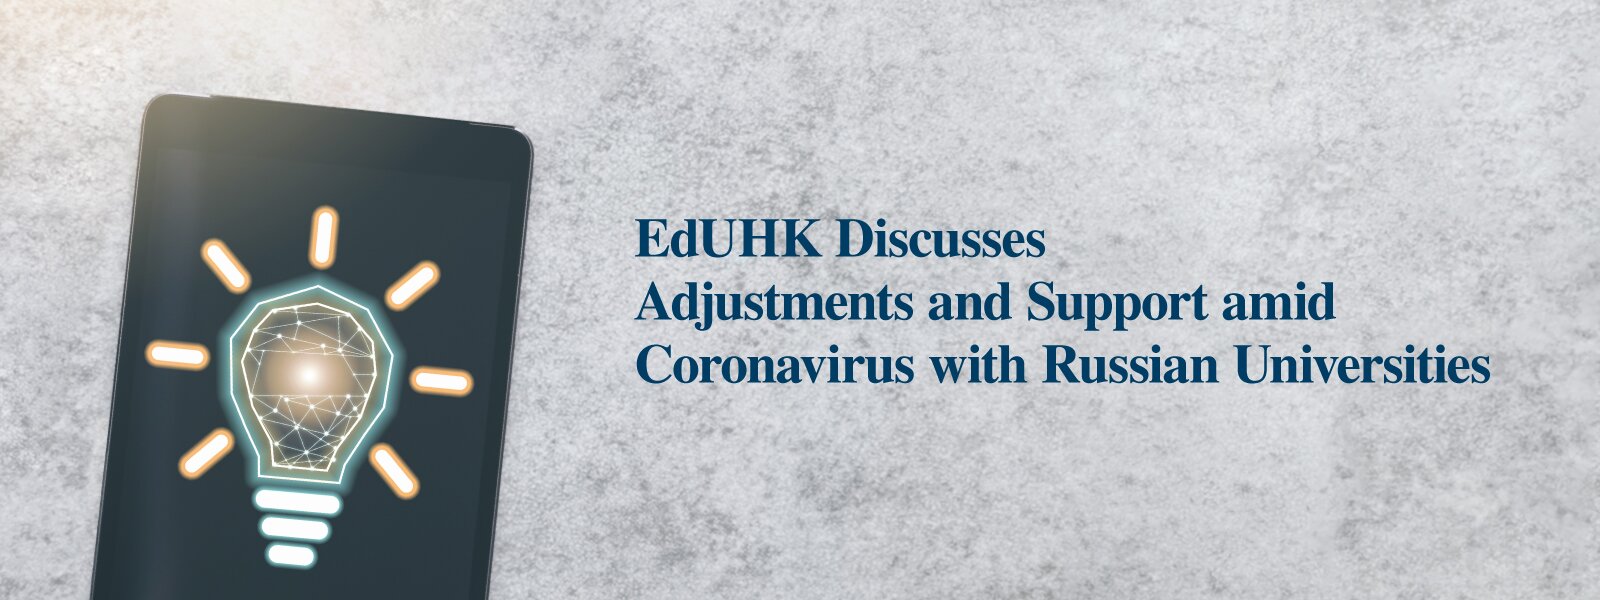 EdUHK Discusses Adjustments and Support amid Coronavirus with Russian Universities